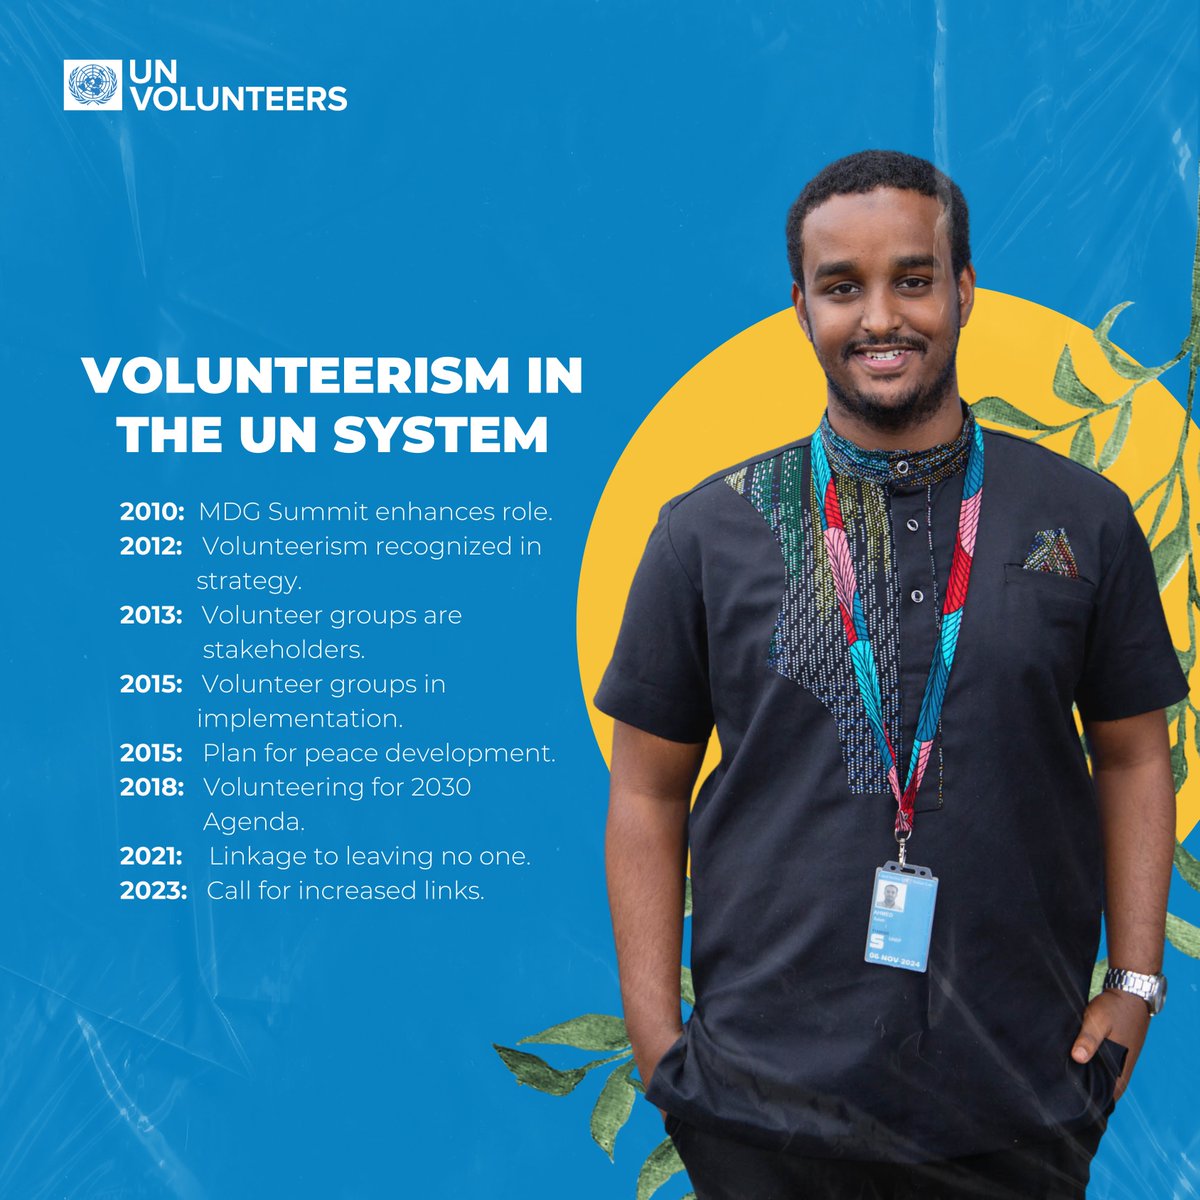 Here's a brief journey exploring how volunteerism 🌍🤝has evolved within the @UN over the past 10+ years. 👉 bit.ly/3ycADos